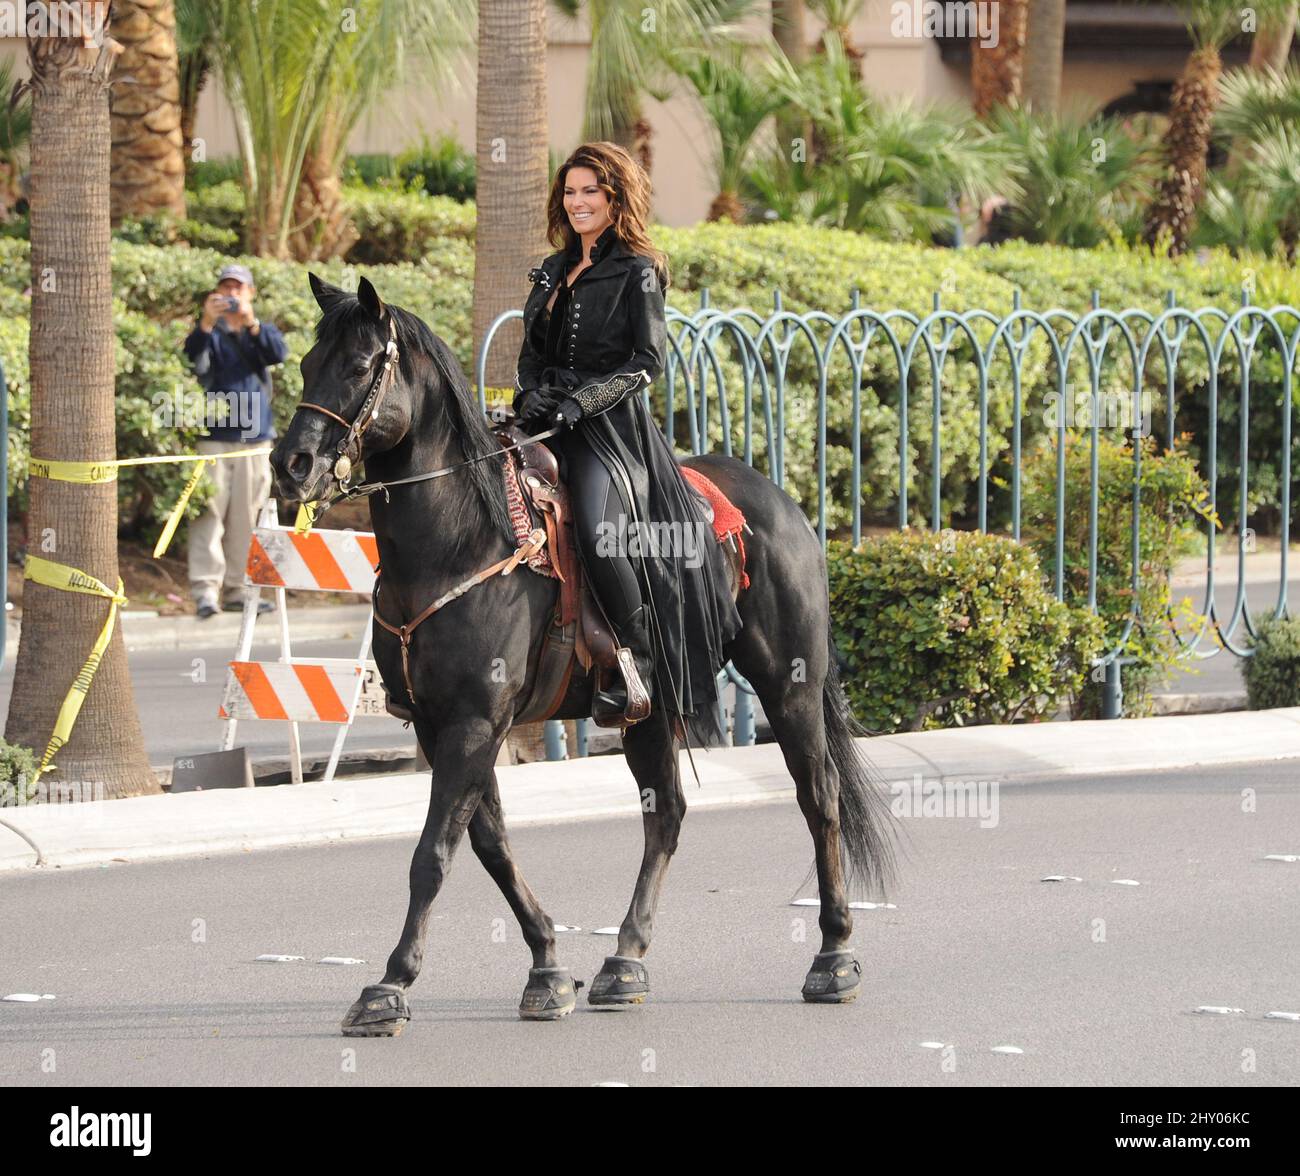 Shania Twain arrives at The Colosseum at Caesars Palace to make final preparations for the debut of her brand new show 'Shania: Still the One' in Las Vegas, USA. Stock Photo